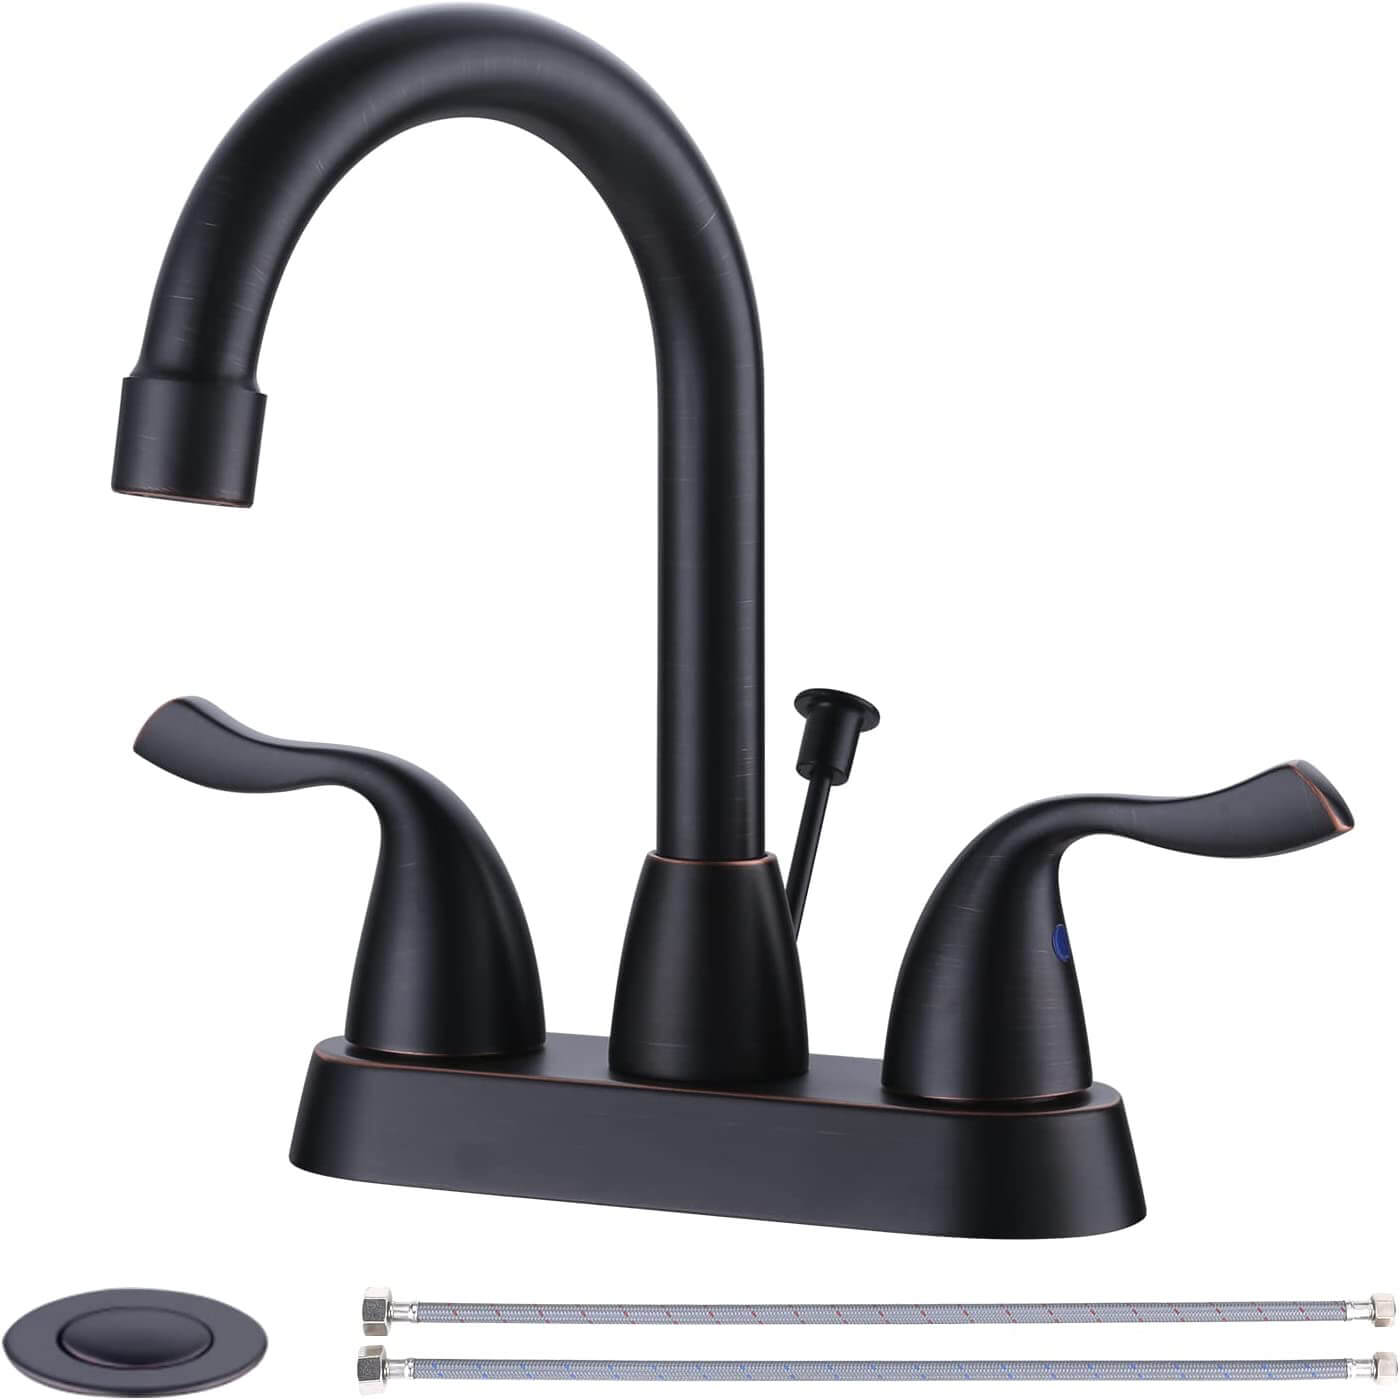 iVIGA Oil Rubbed Bronze 4 Inch Centerset Bathroom Sink Faucet with Drain Assembly and Supply Hoses